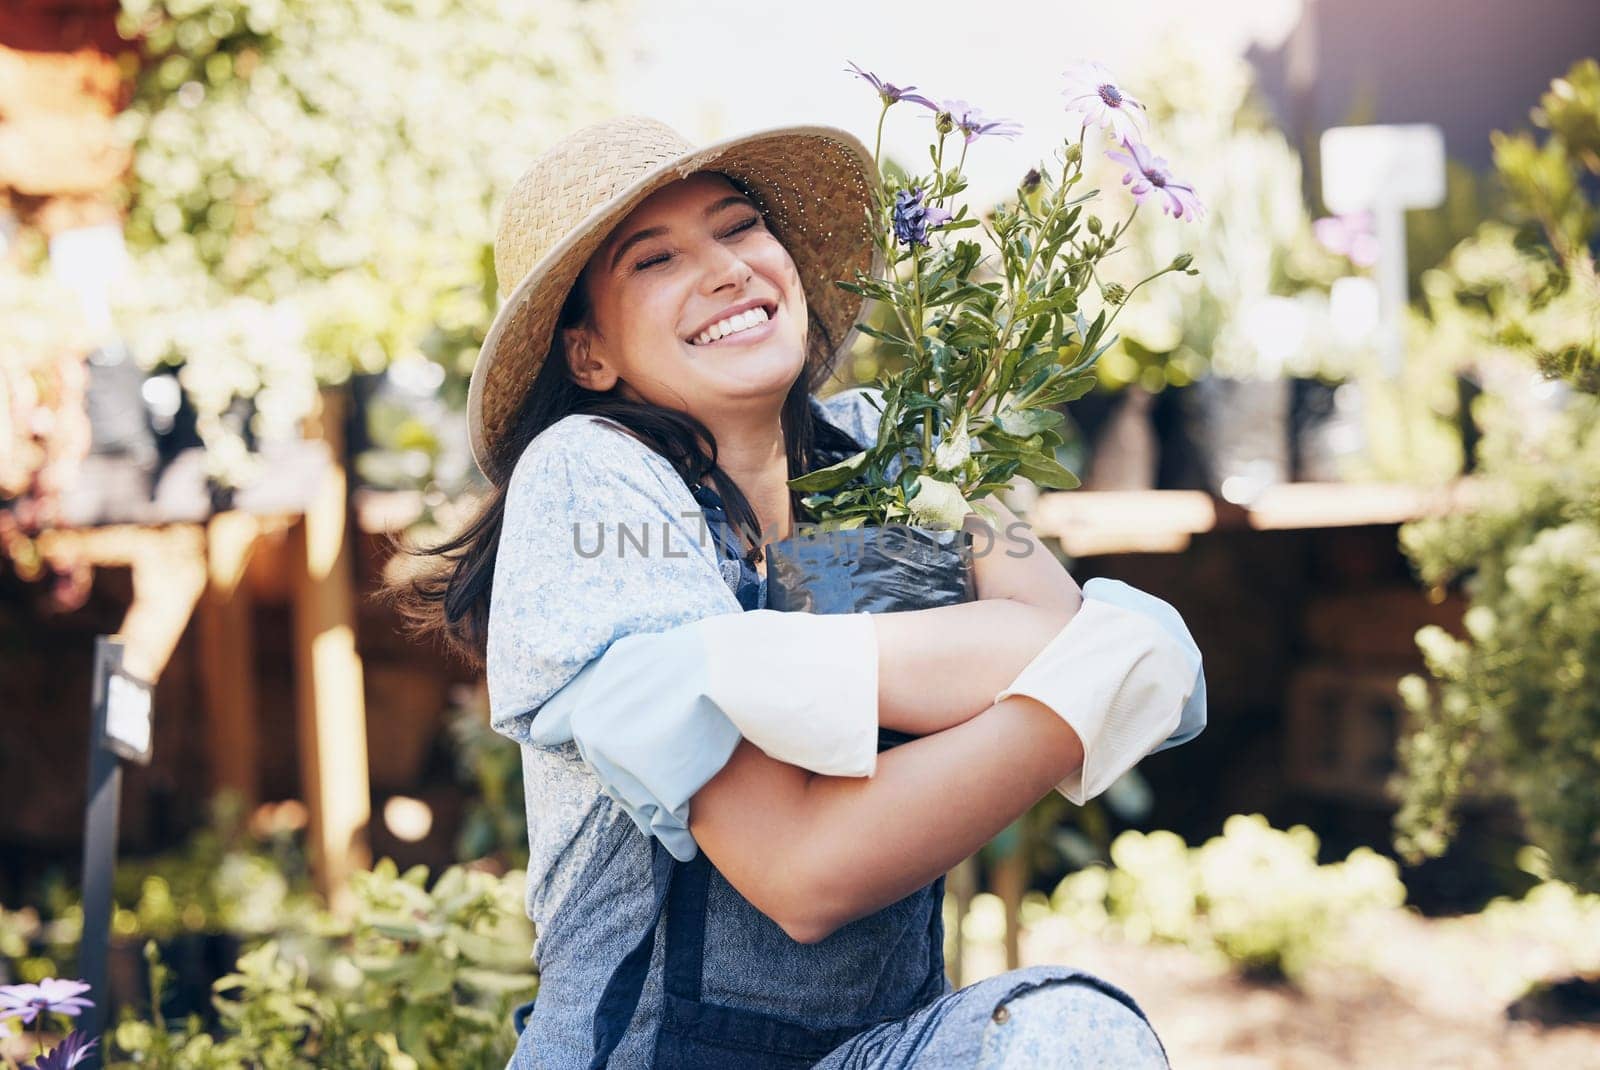 Plant, outdoor garden and smile of woman hug flowers for environment, sustainability or ecology. Nature, happiness and female person for green nursery, agriculture or landscaping in backyard by YuriArcurs